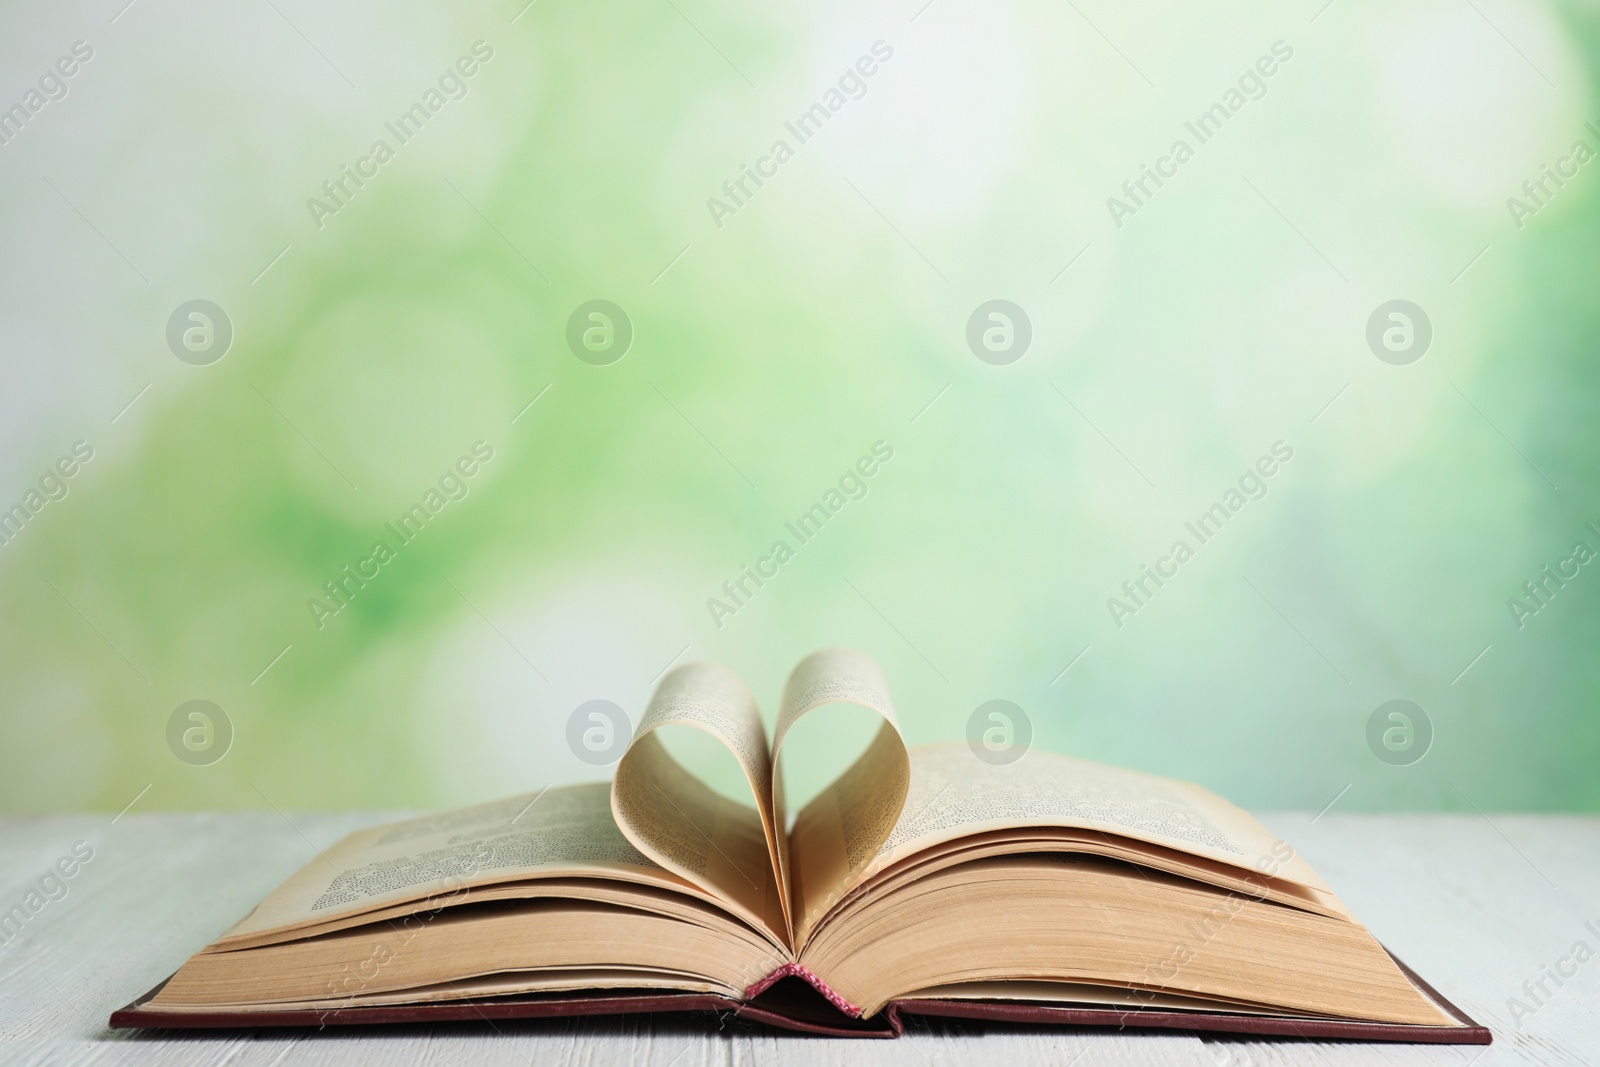 Photo of Open book on white wooden table against blurred green background. Space for text